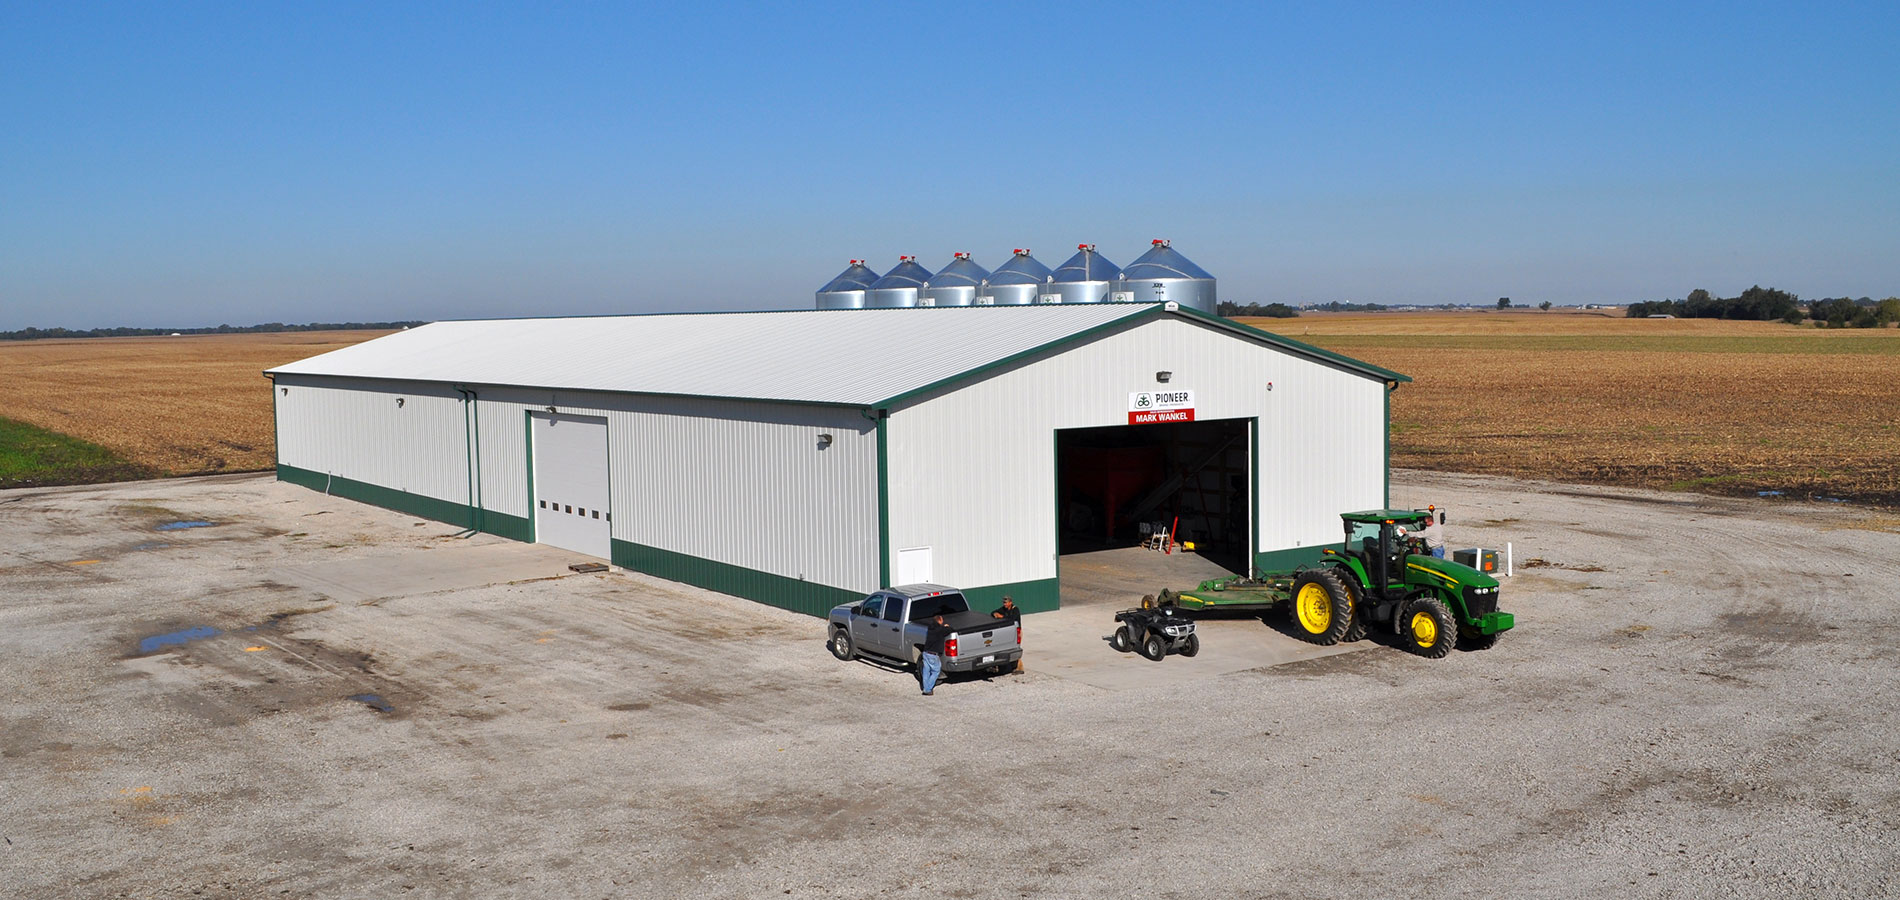 Agriculture Buildings, Pole Barns, Sheds, Workshops Machine Sheds, Cattle Barns and more.